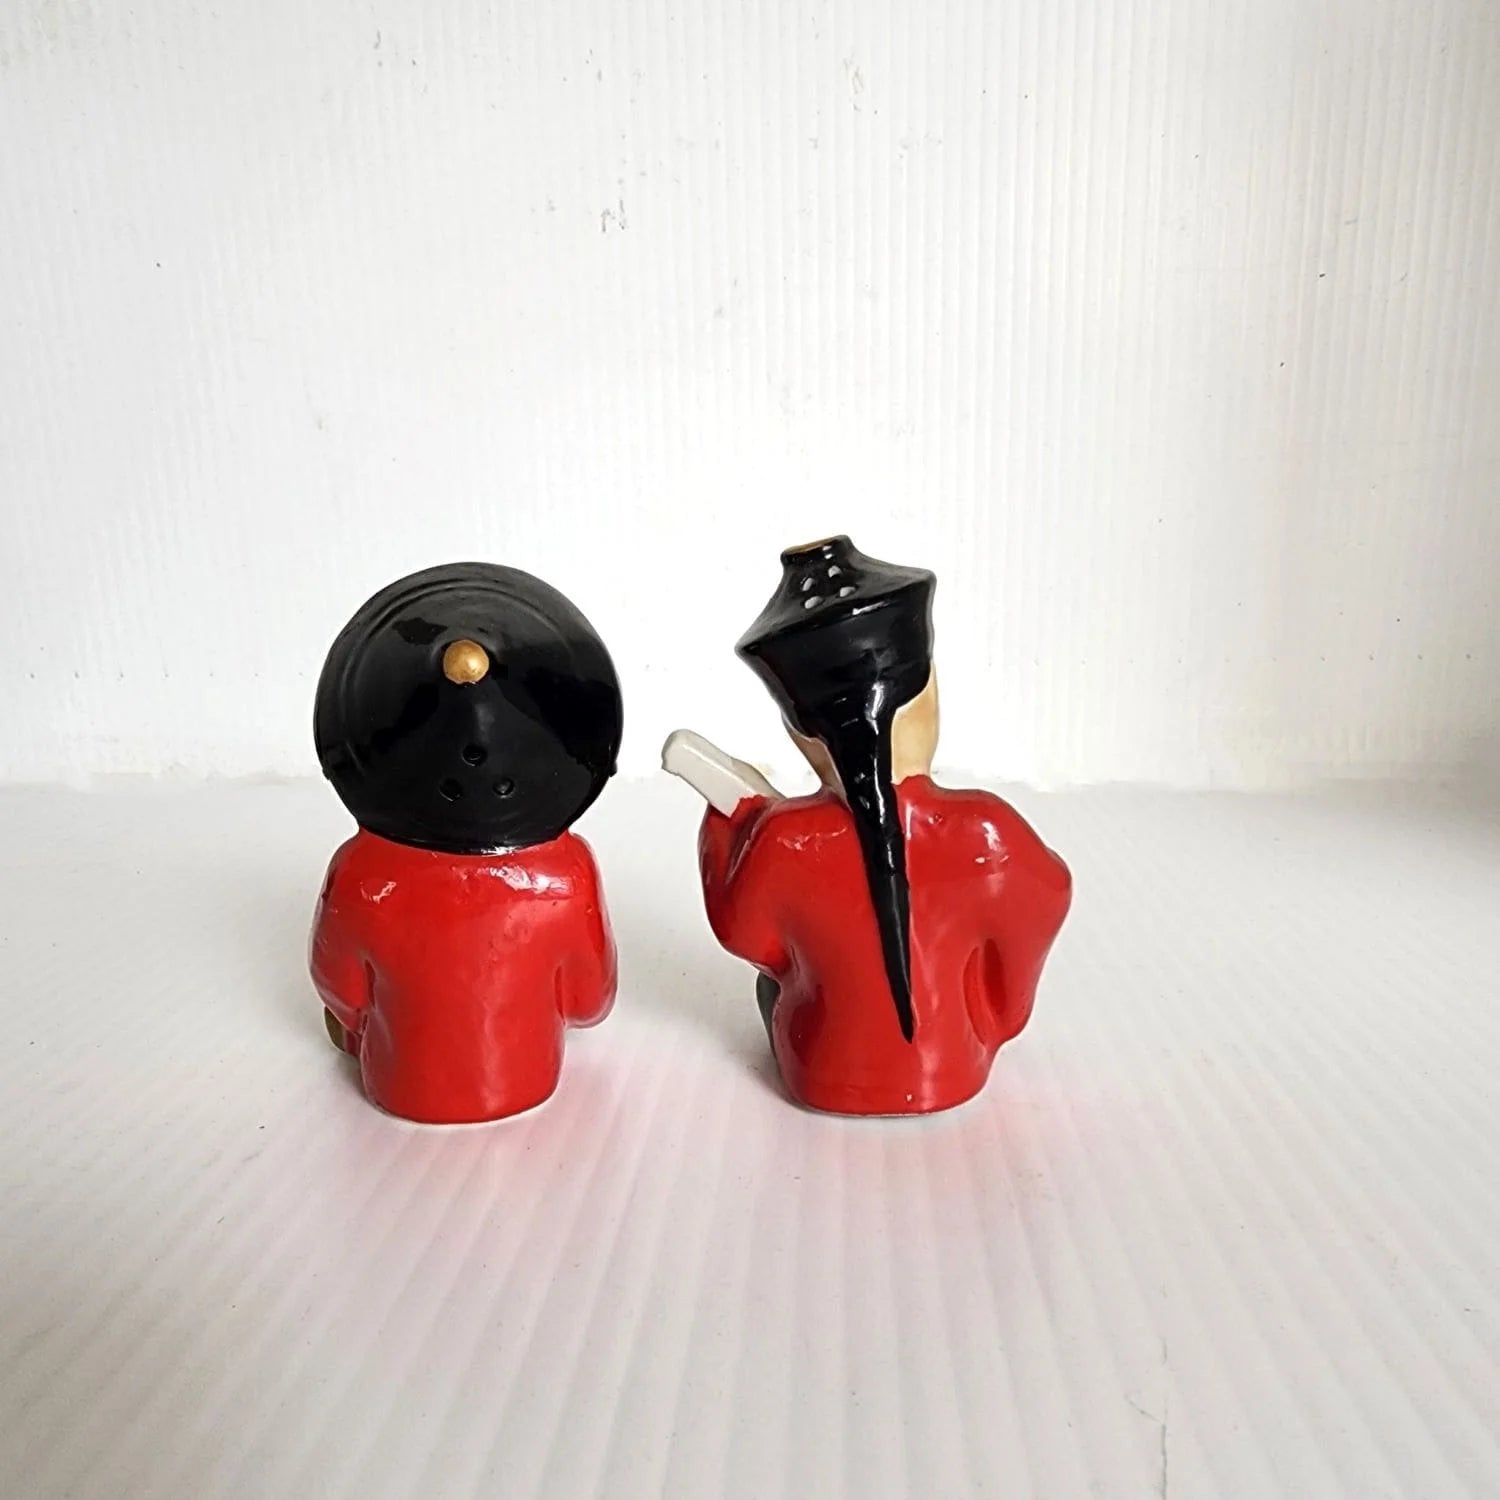 Two Asian figurines sitting on a table, showcasing cultural diversity and artistic craftsmanship.